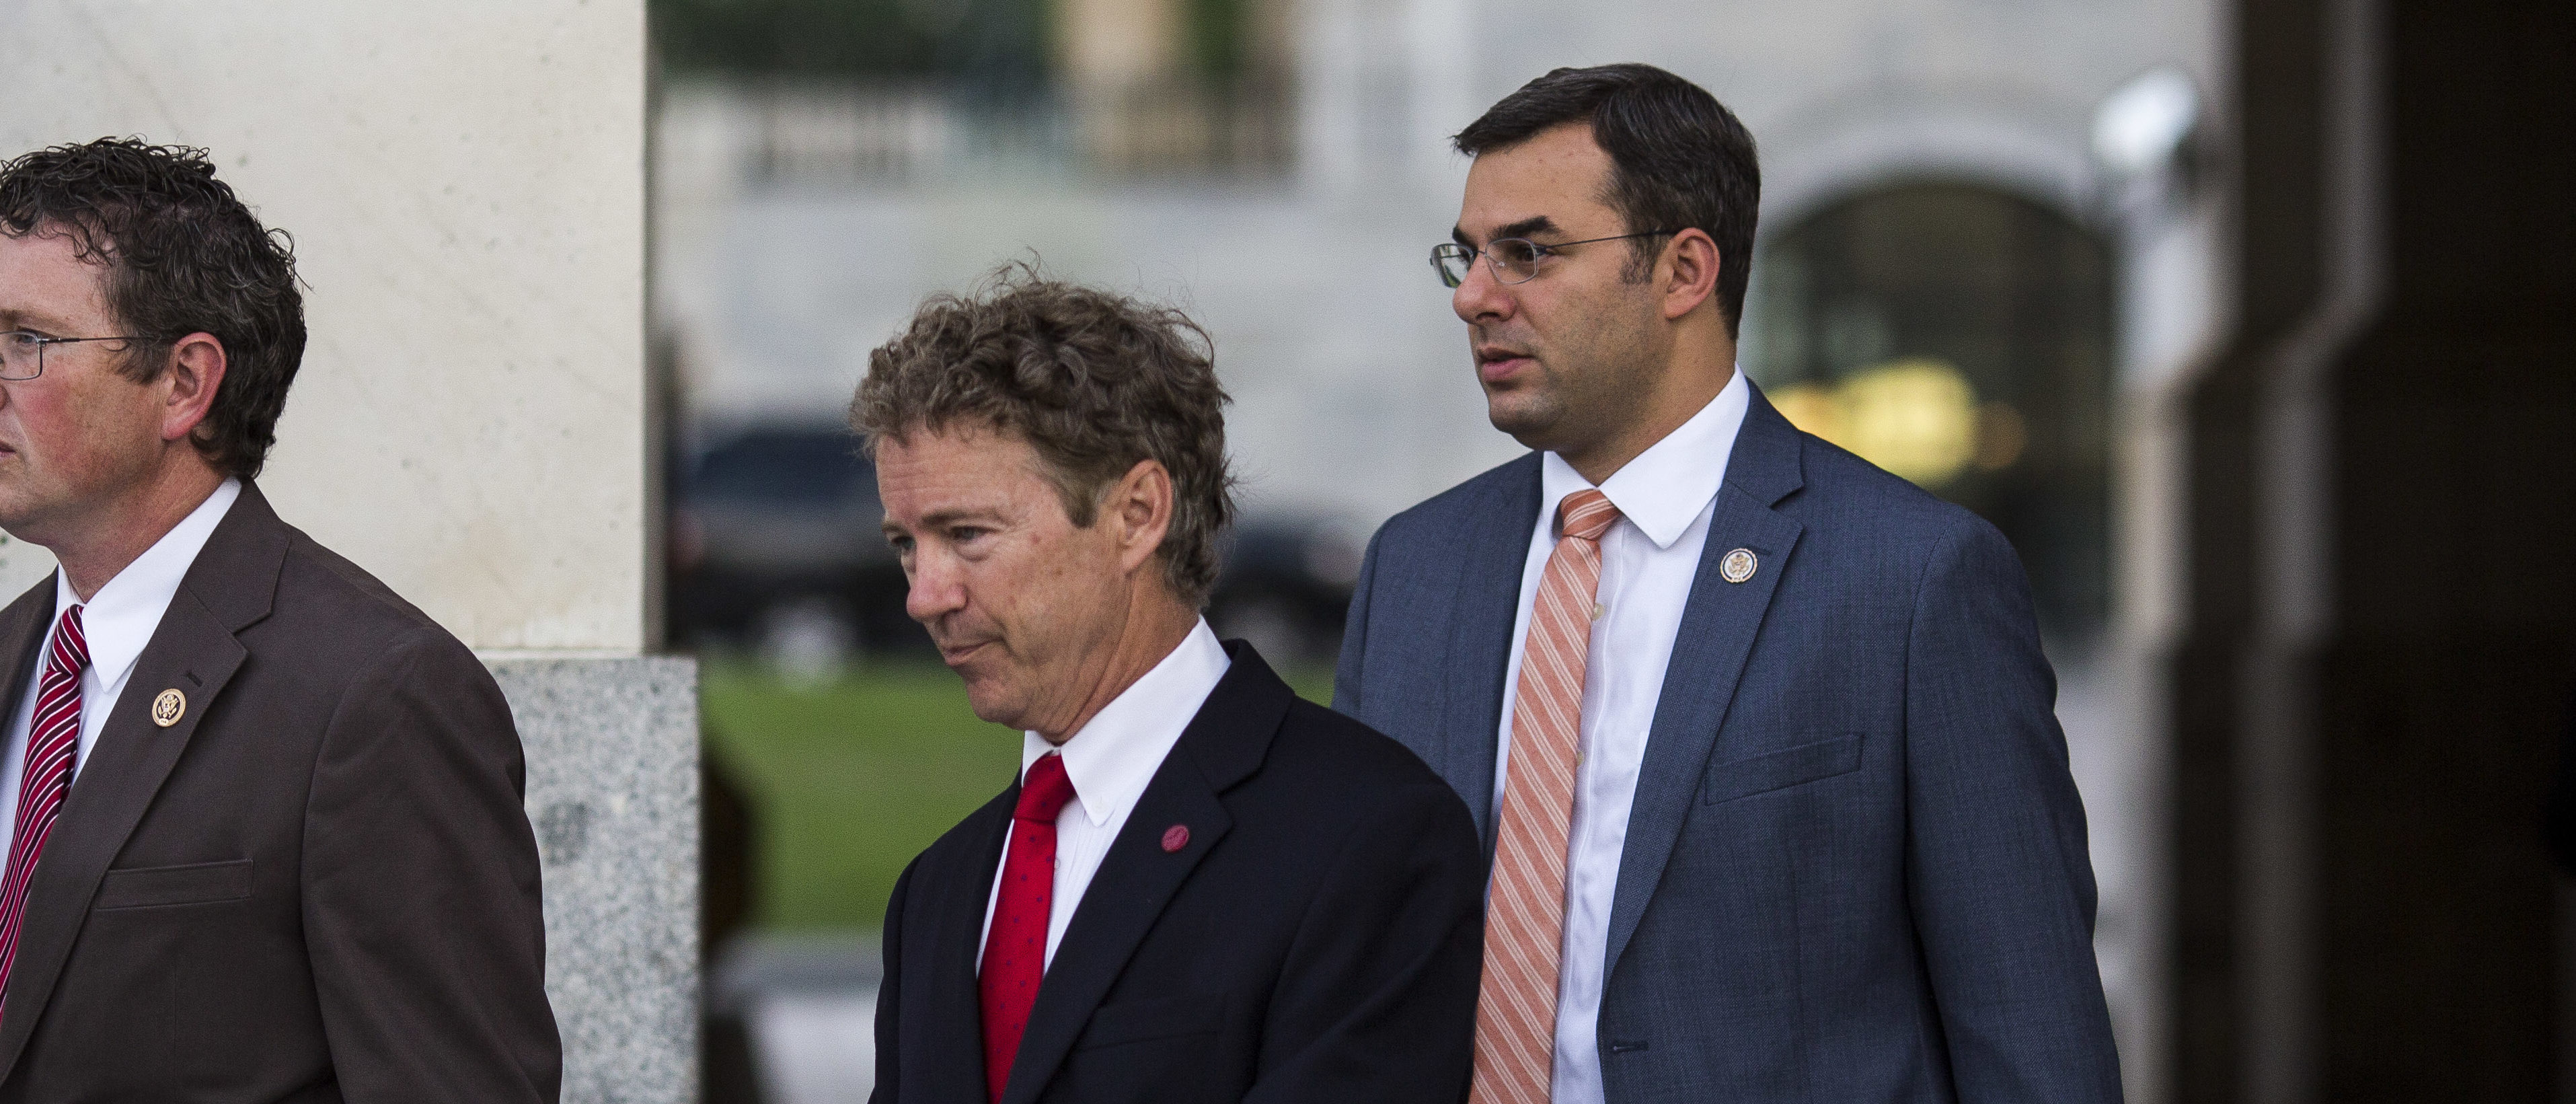 WASHINGTON, DC - MAY 31: (L - R) Rep. Thomas Massie (R-KY), Sen. Rand Paul (R-KY) and Rep. Justin Amash (R-MI) exit the Senate chamber after Paul spoke about surveillance legislation on the Senate floor, on Capitol Hill, May 31, 2015 in Washington, DC. The National Security Agency's authority to collect bulk telephone data is set to expire June 1, unless the Senate can come to an agreement to extend the surveillance programs. (Photo by Drew Angerer/Getty Images)